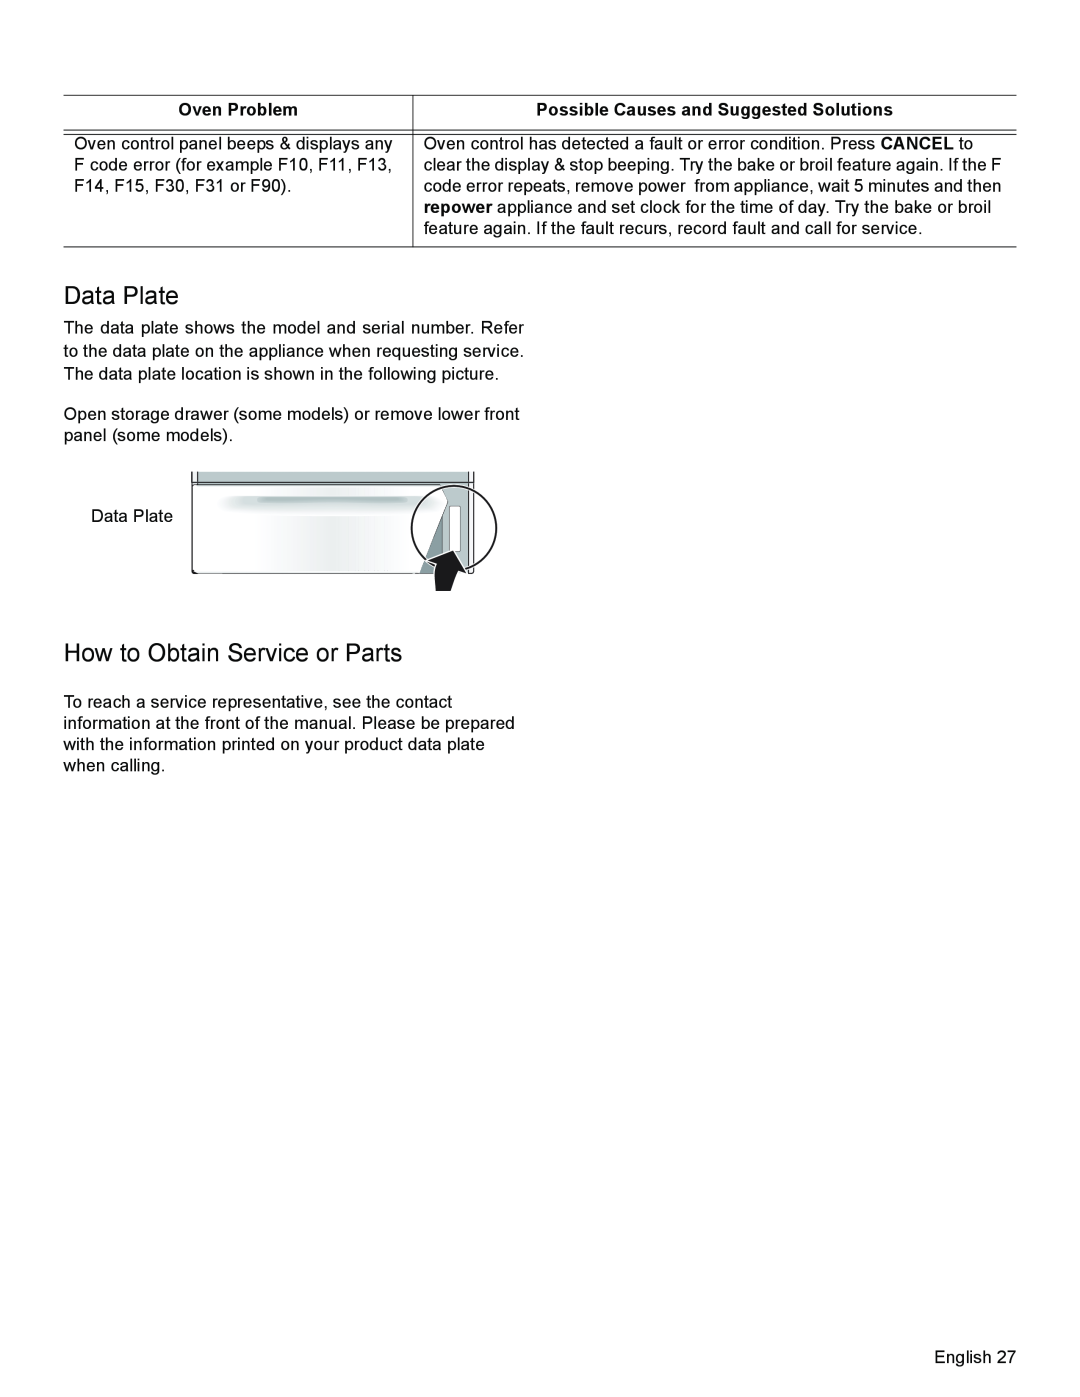 Bosch Appliances HGS3053UC manual Data Plate, How to Obtain Service or Parts, Oven Problem 